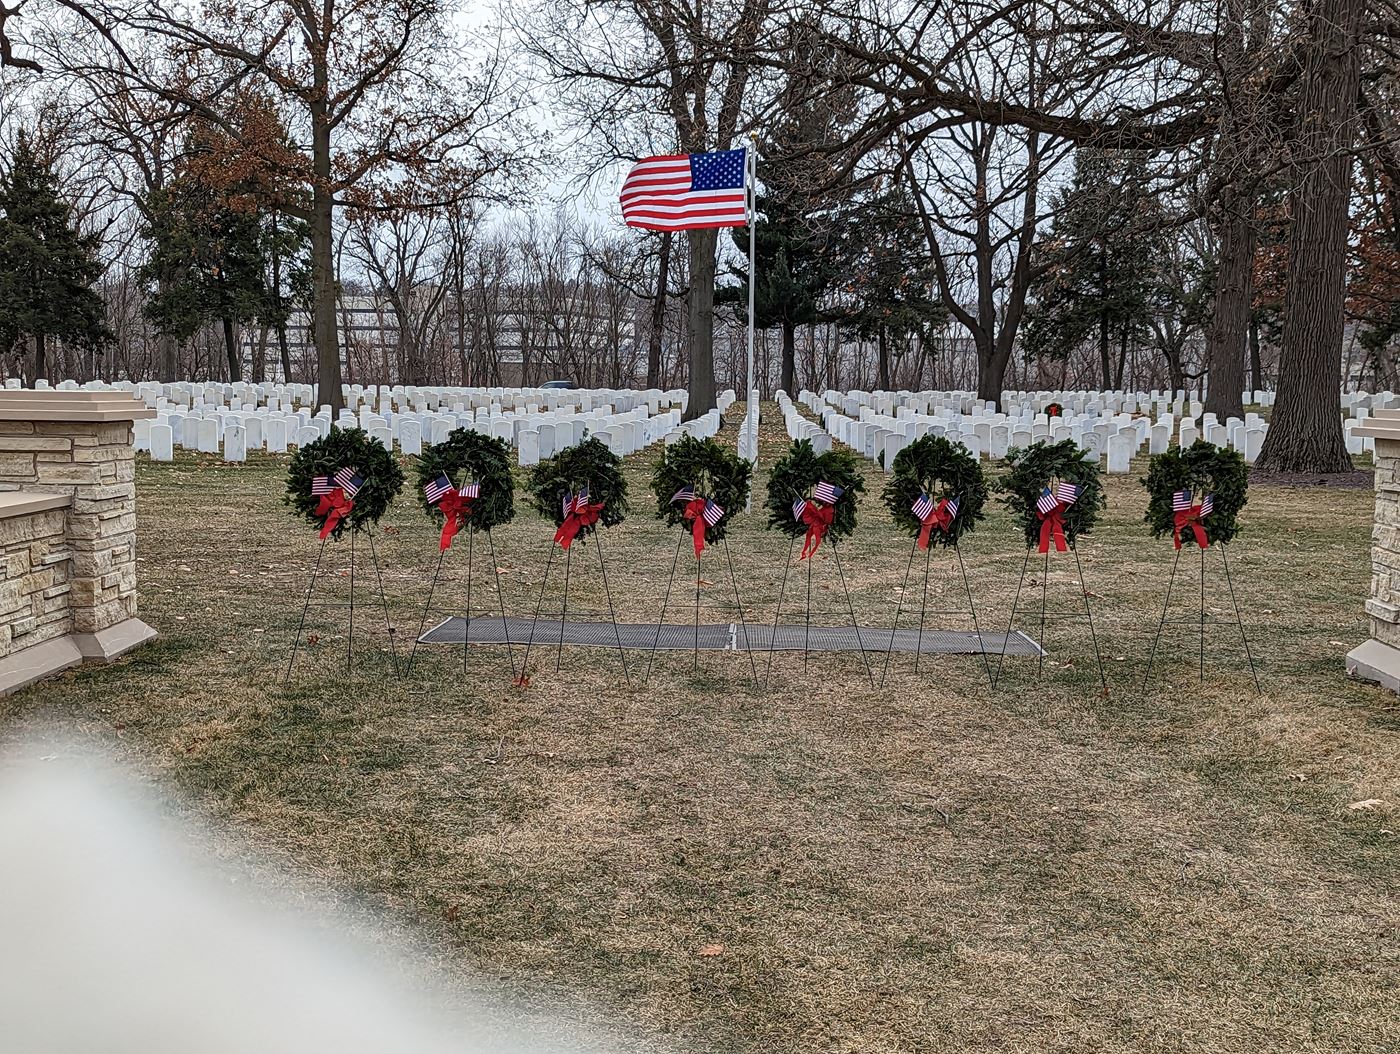 Wreaths representing each branch of service including POW and Merchant Marines